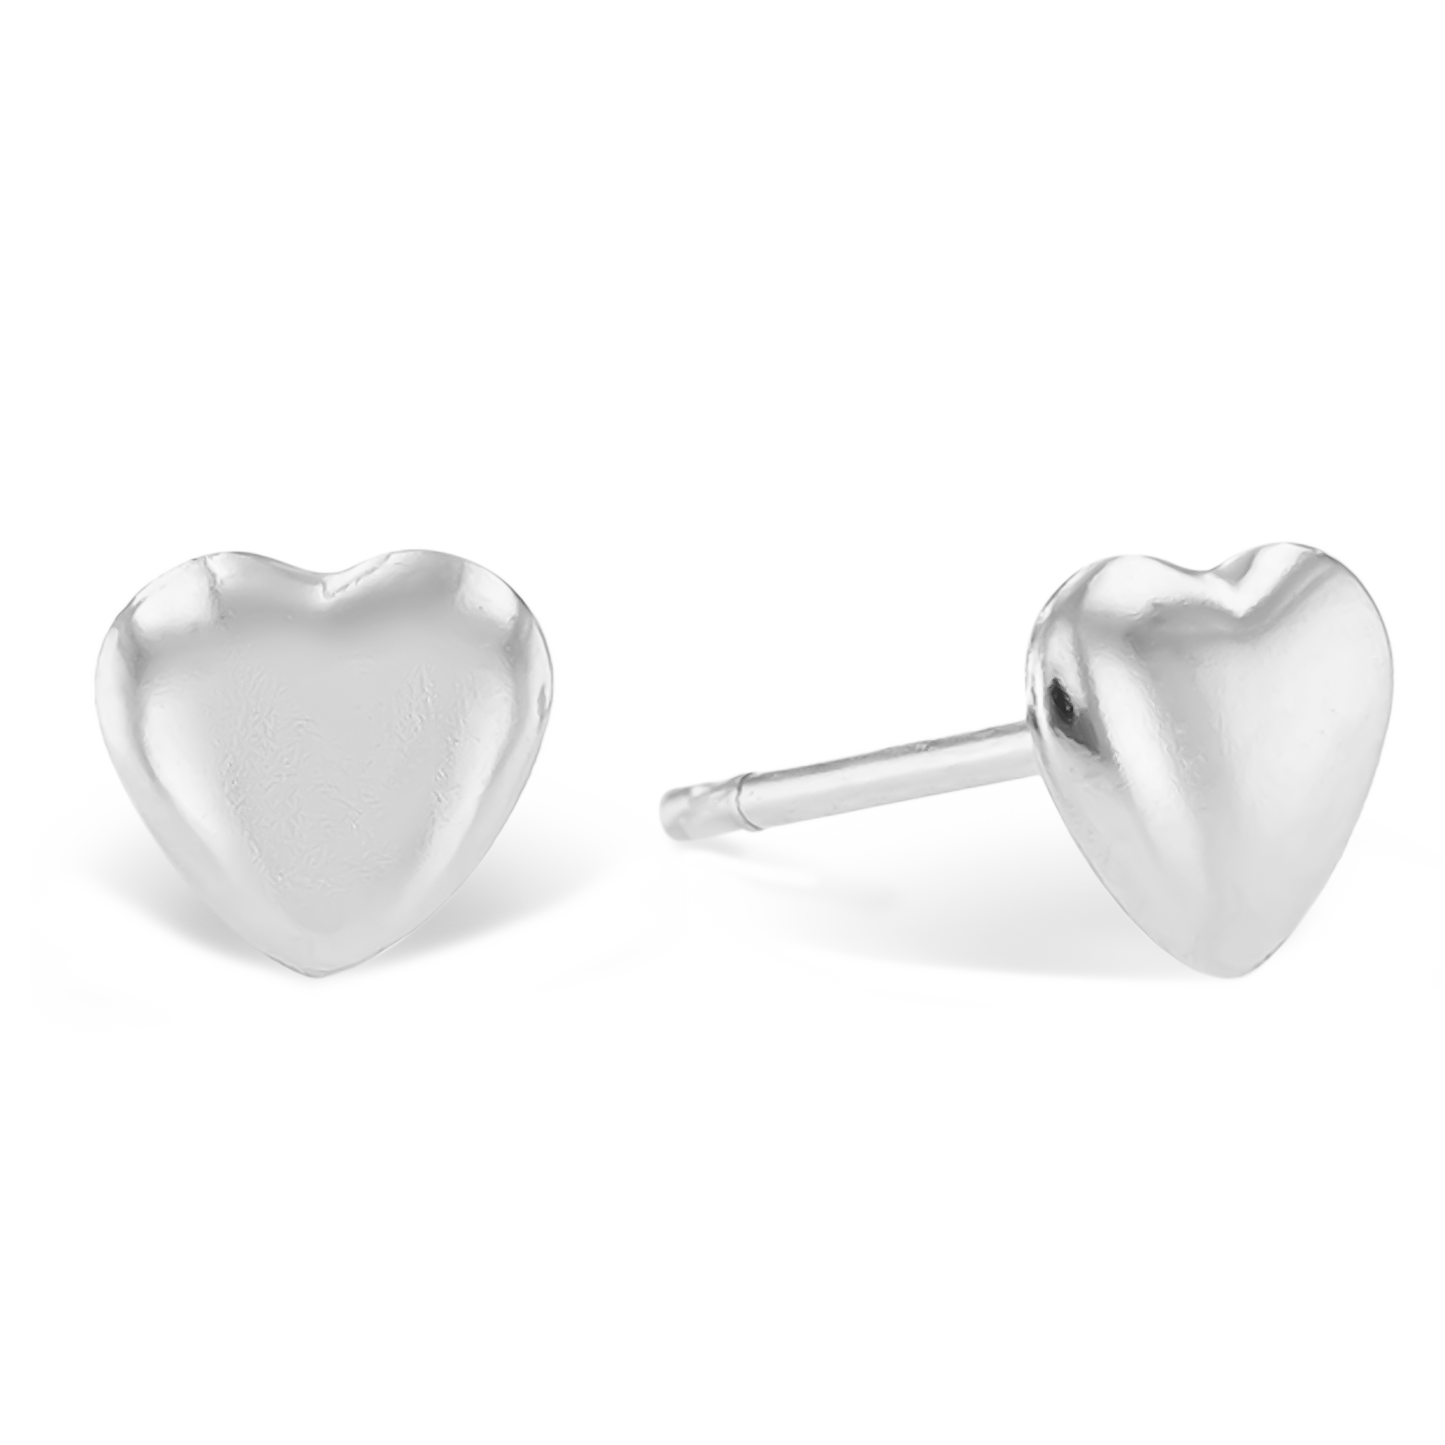 8mm Heart Shape Studs in 9ct White Gold